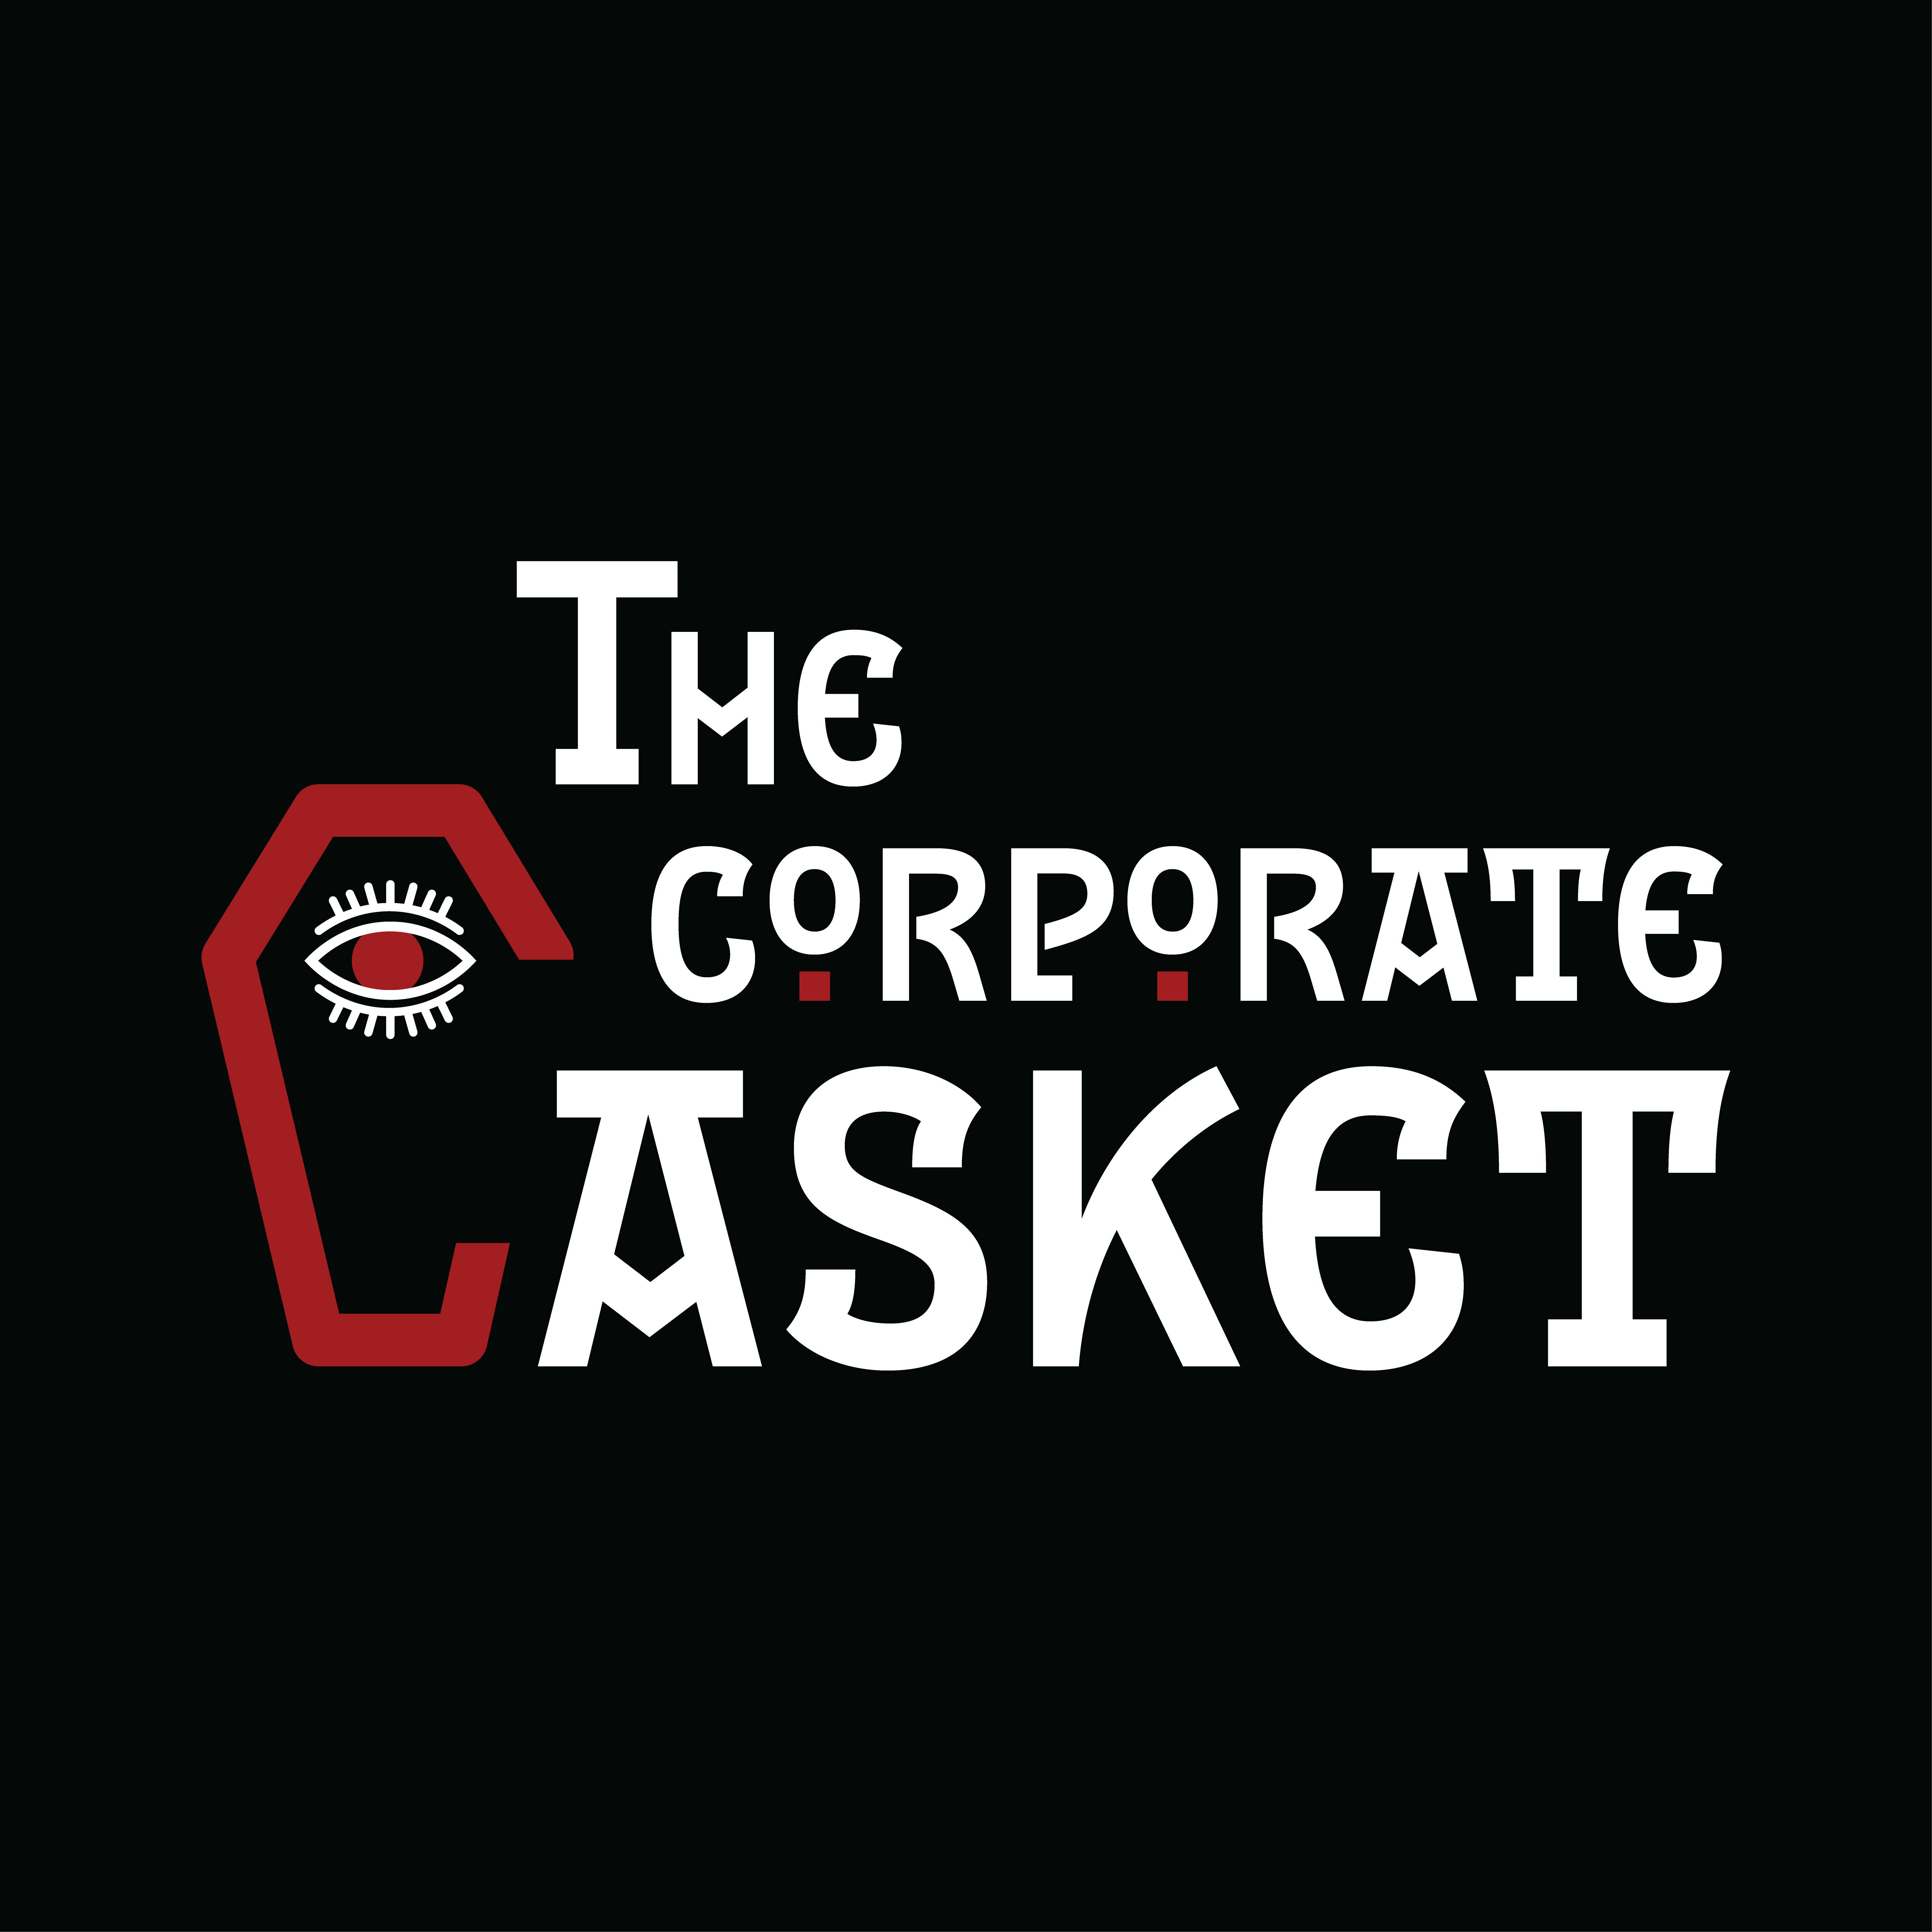 How Lobbying Built the USA | Corporate Casket